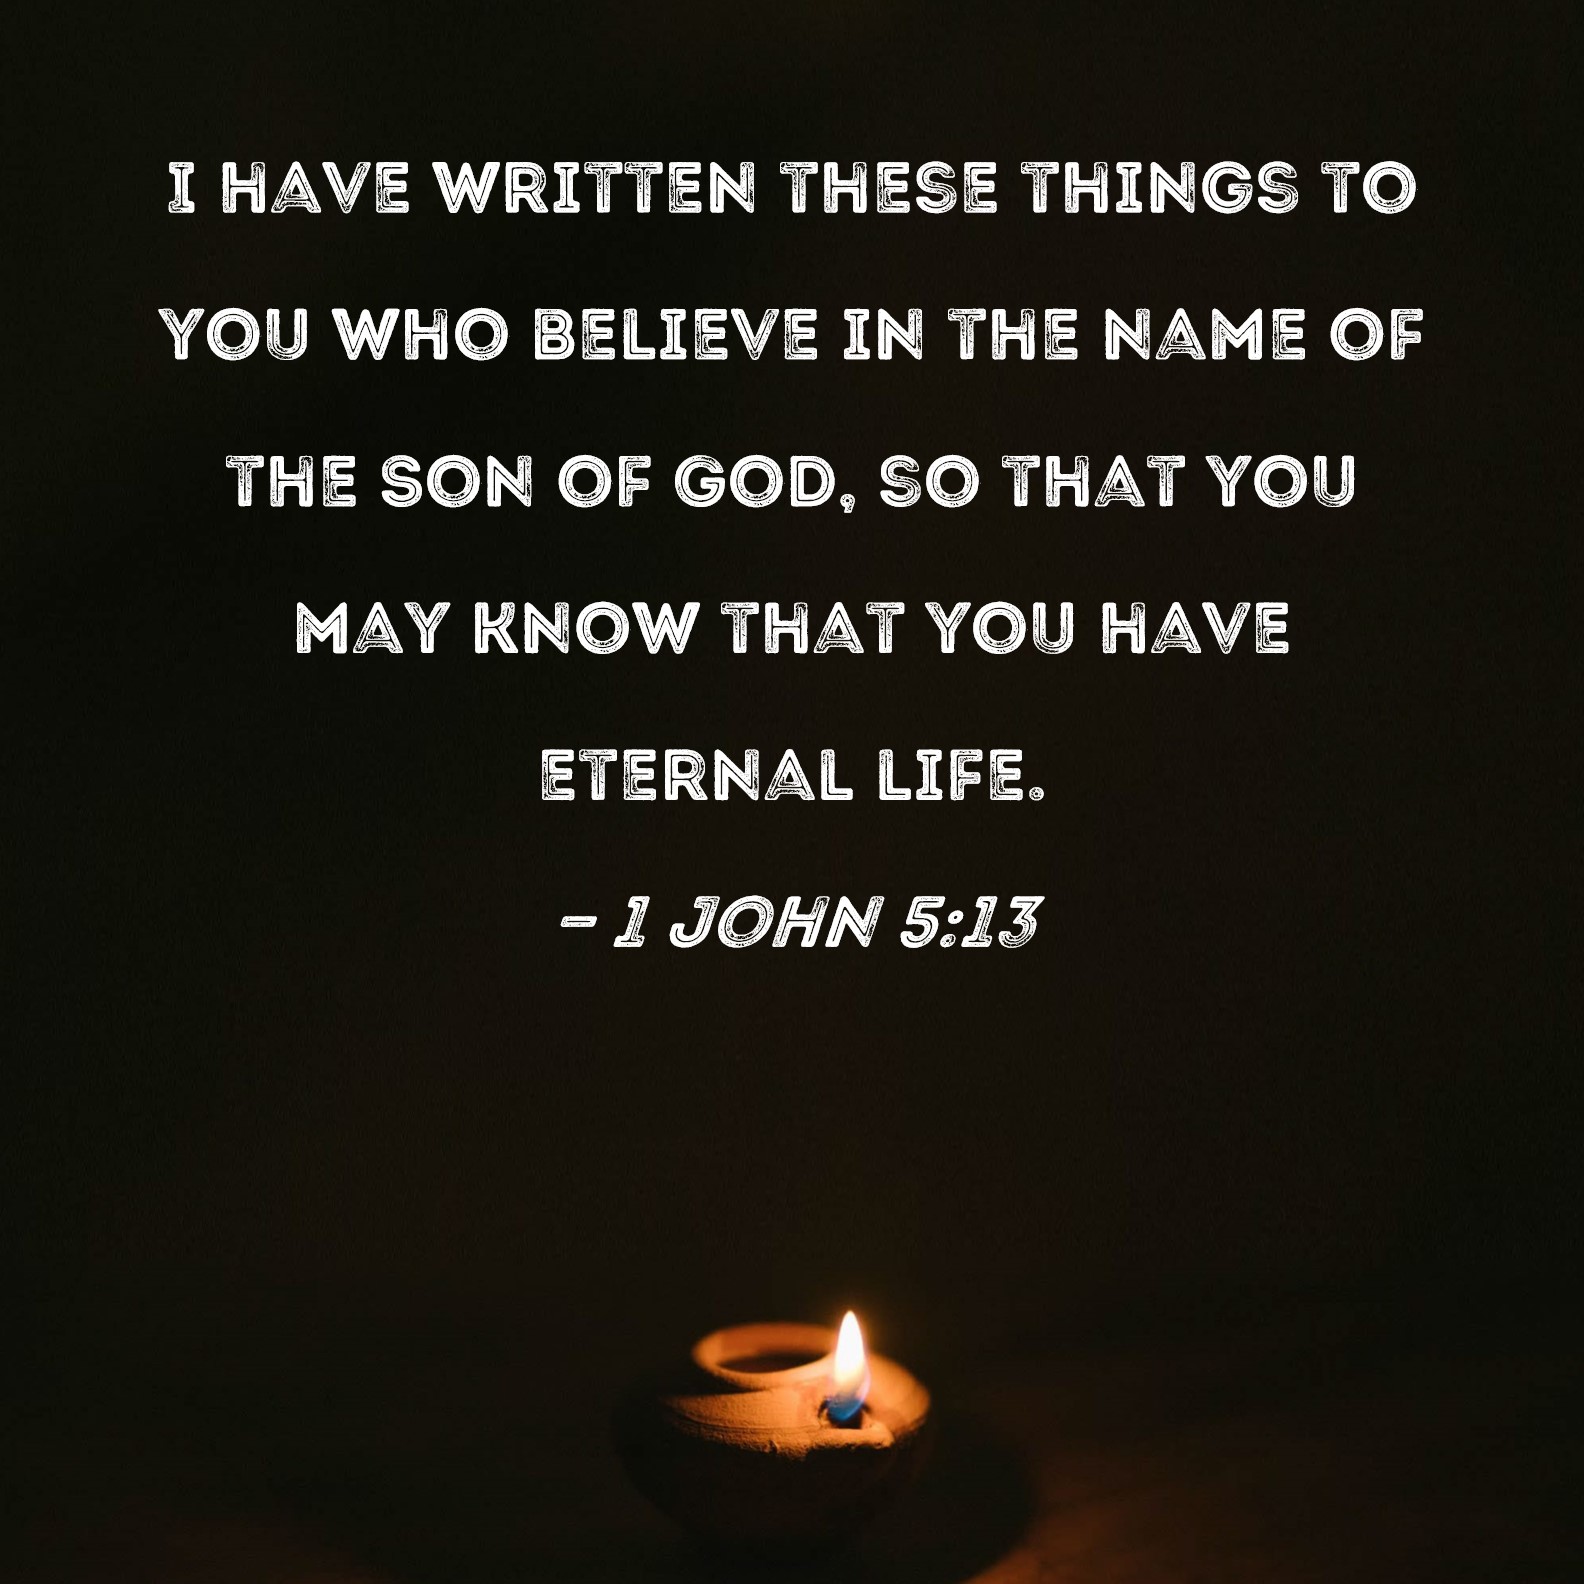 1 John 5:13 I have written these things to you who believe in the